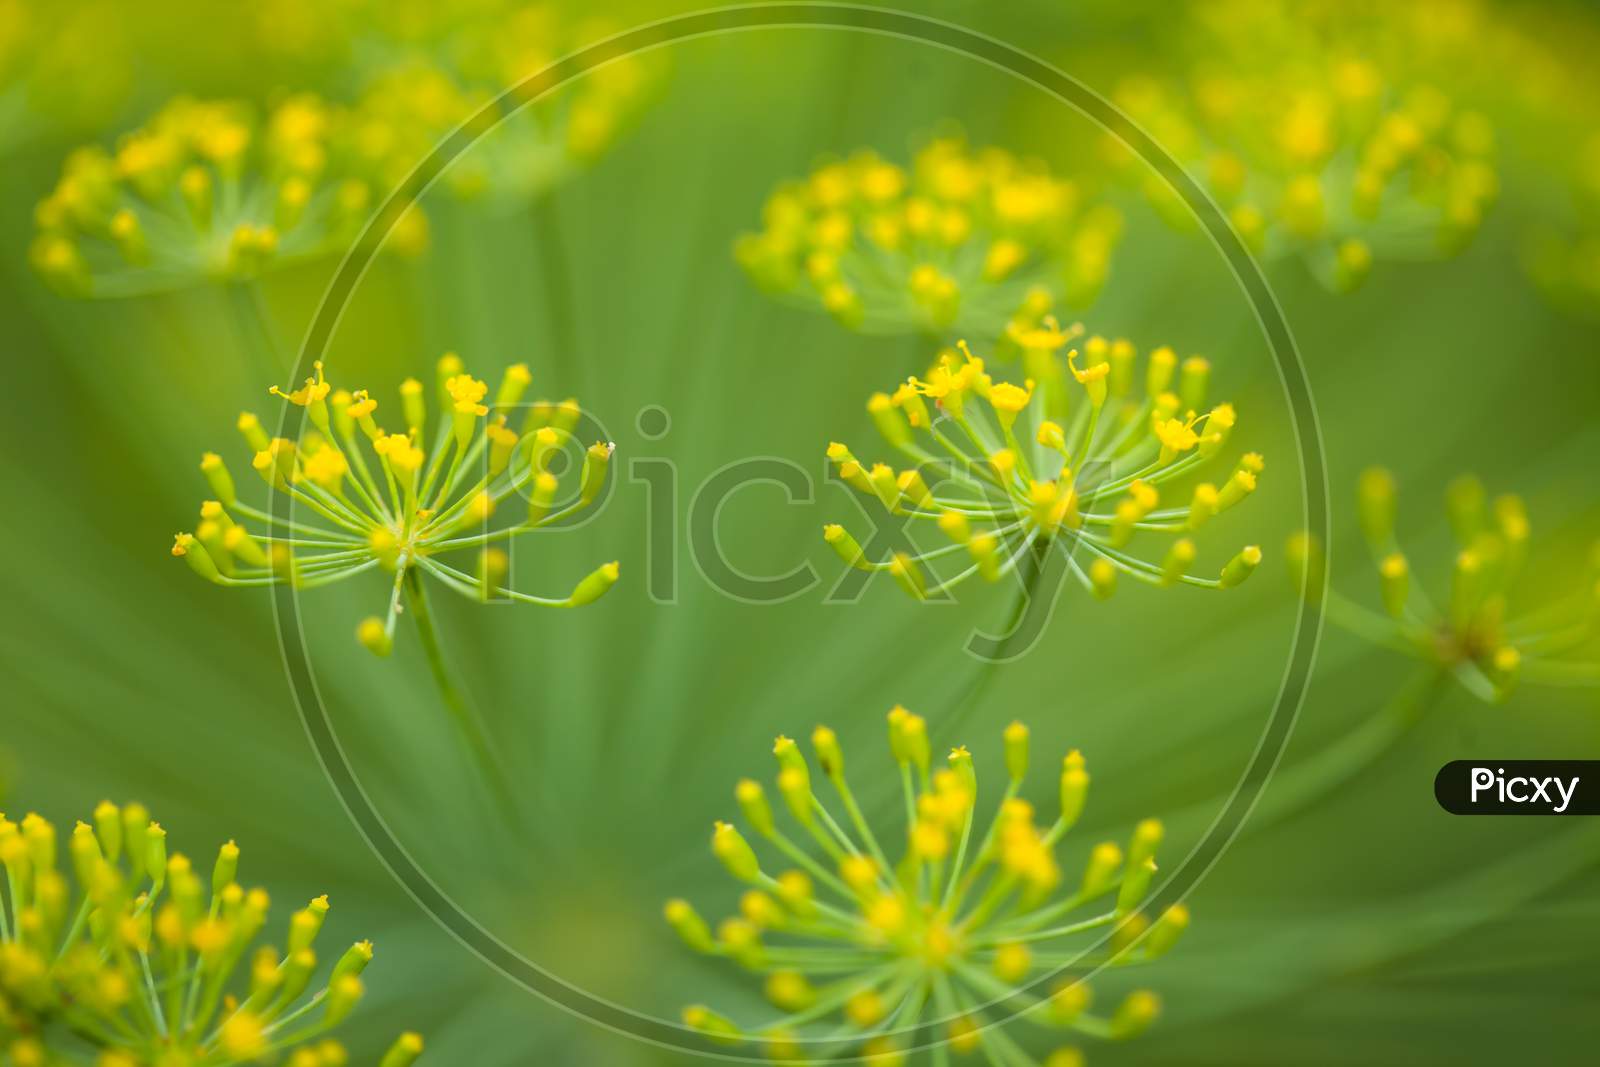 Close-Up Of A Dill Herb